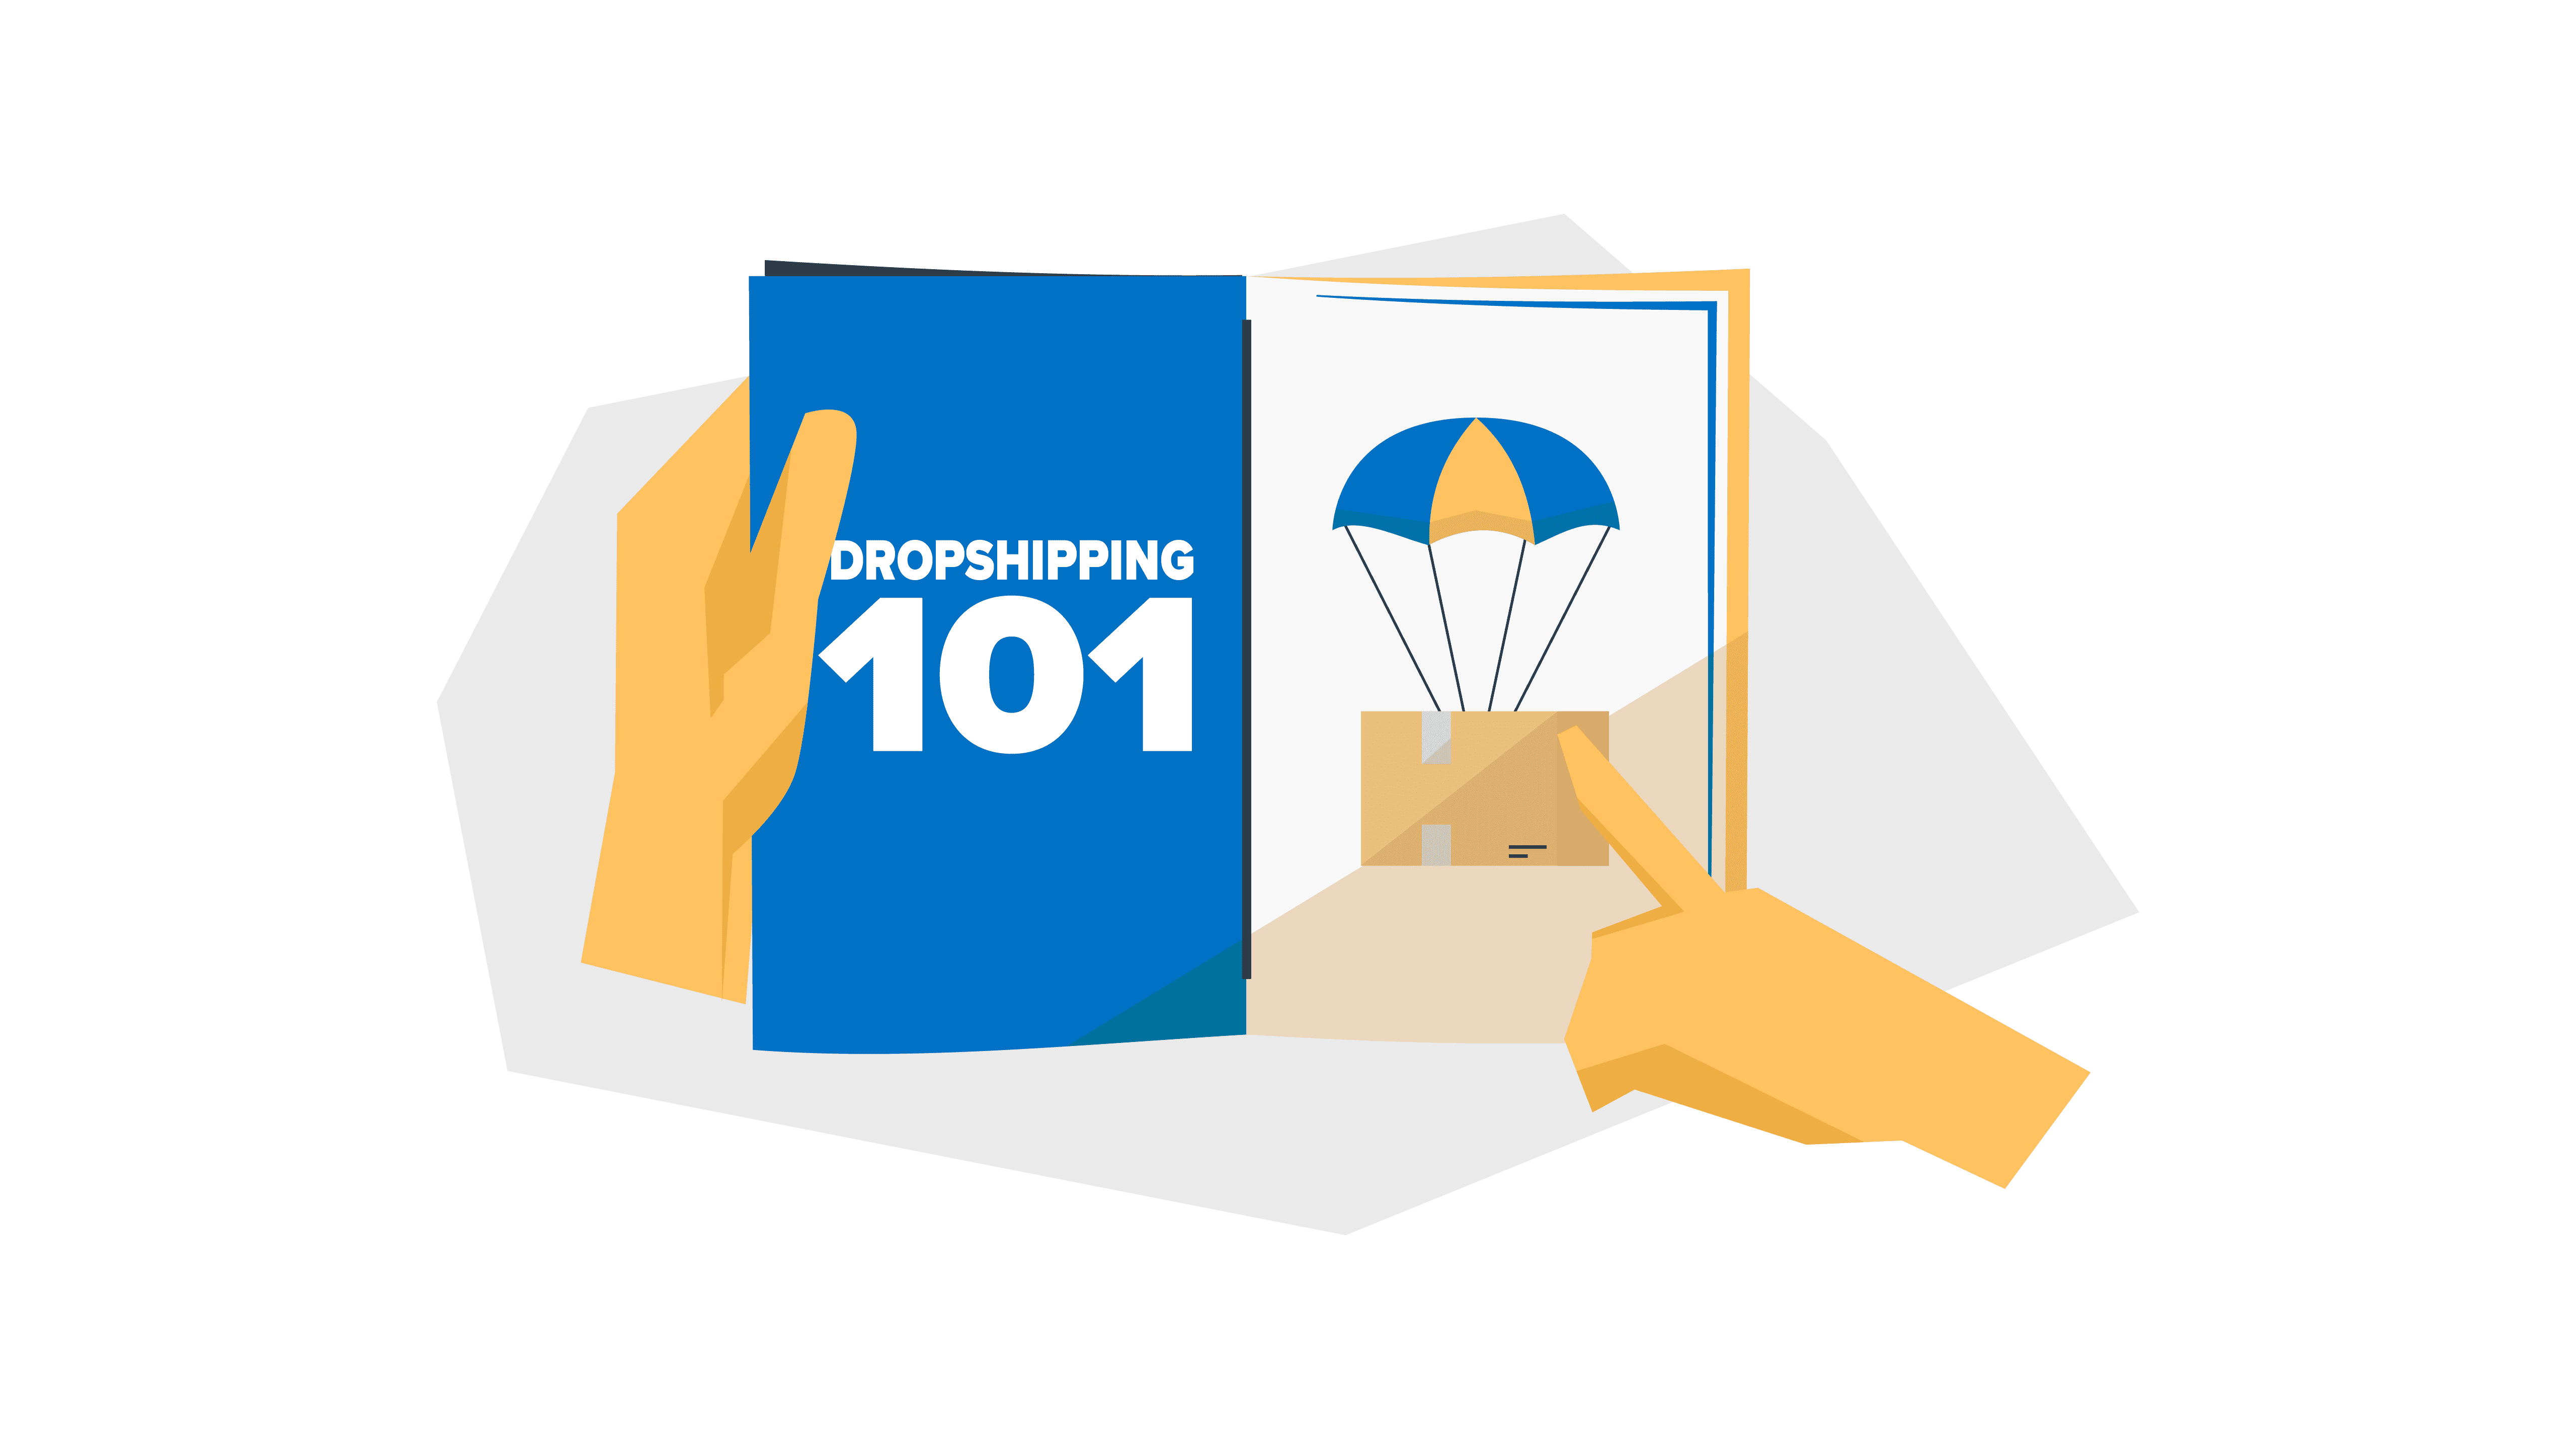 a book called "dropshipping 101" that shows a box with a parachute